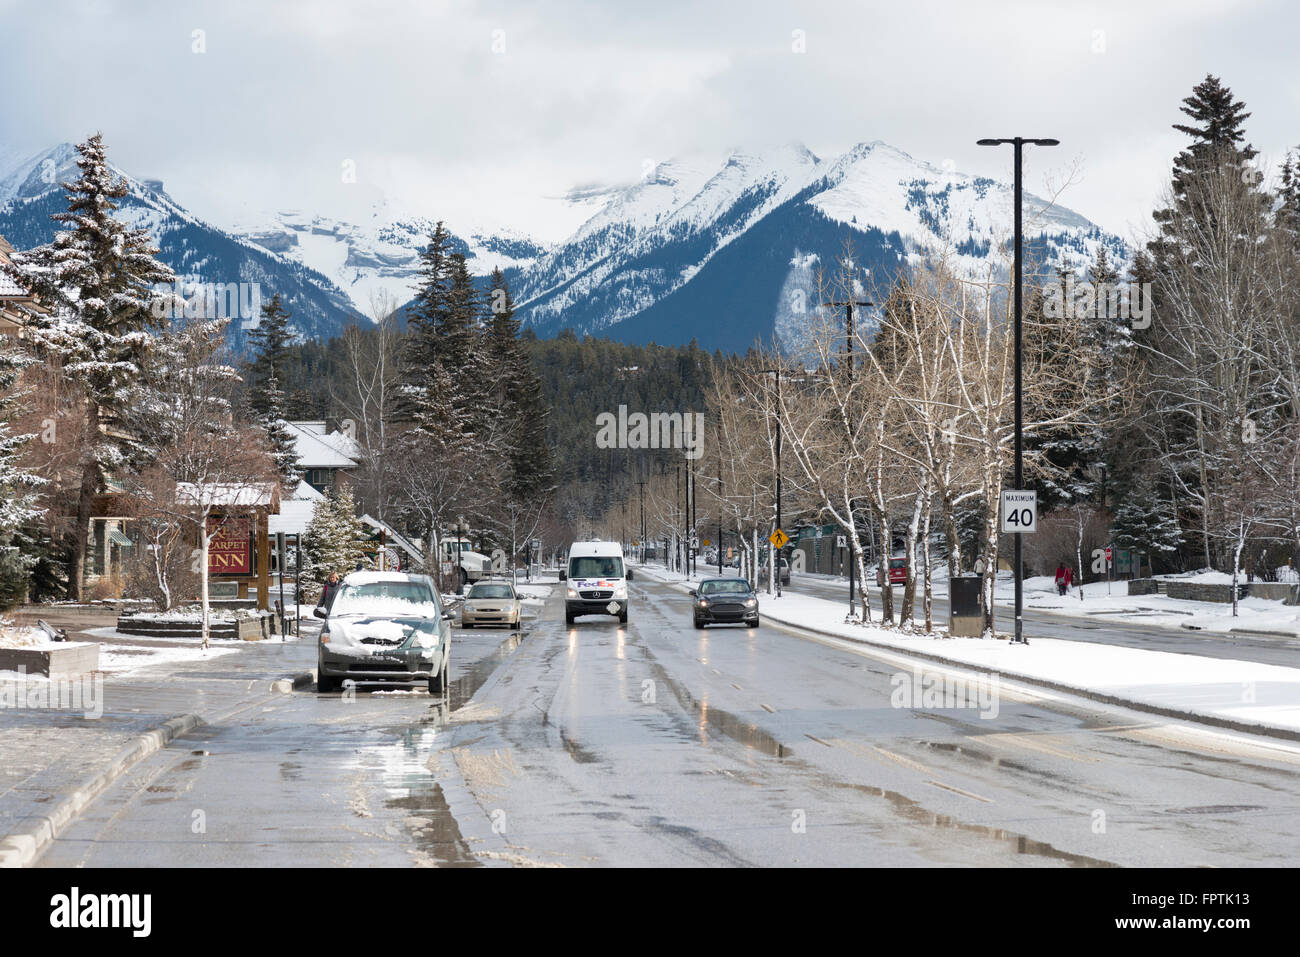 Banff Avenue a road in Banff Canada in winter with views of the Rocky Mountains Stock Photo